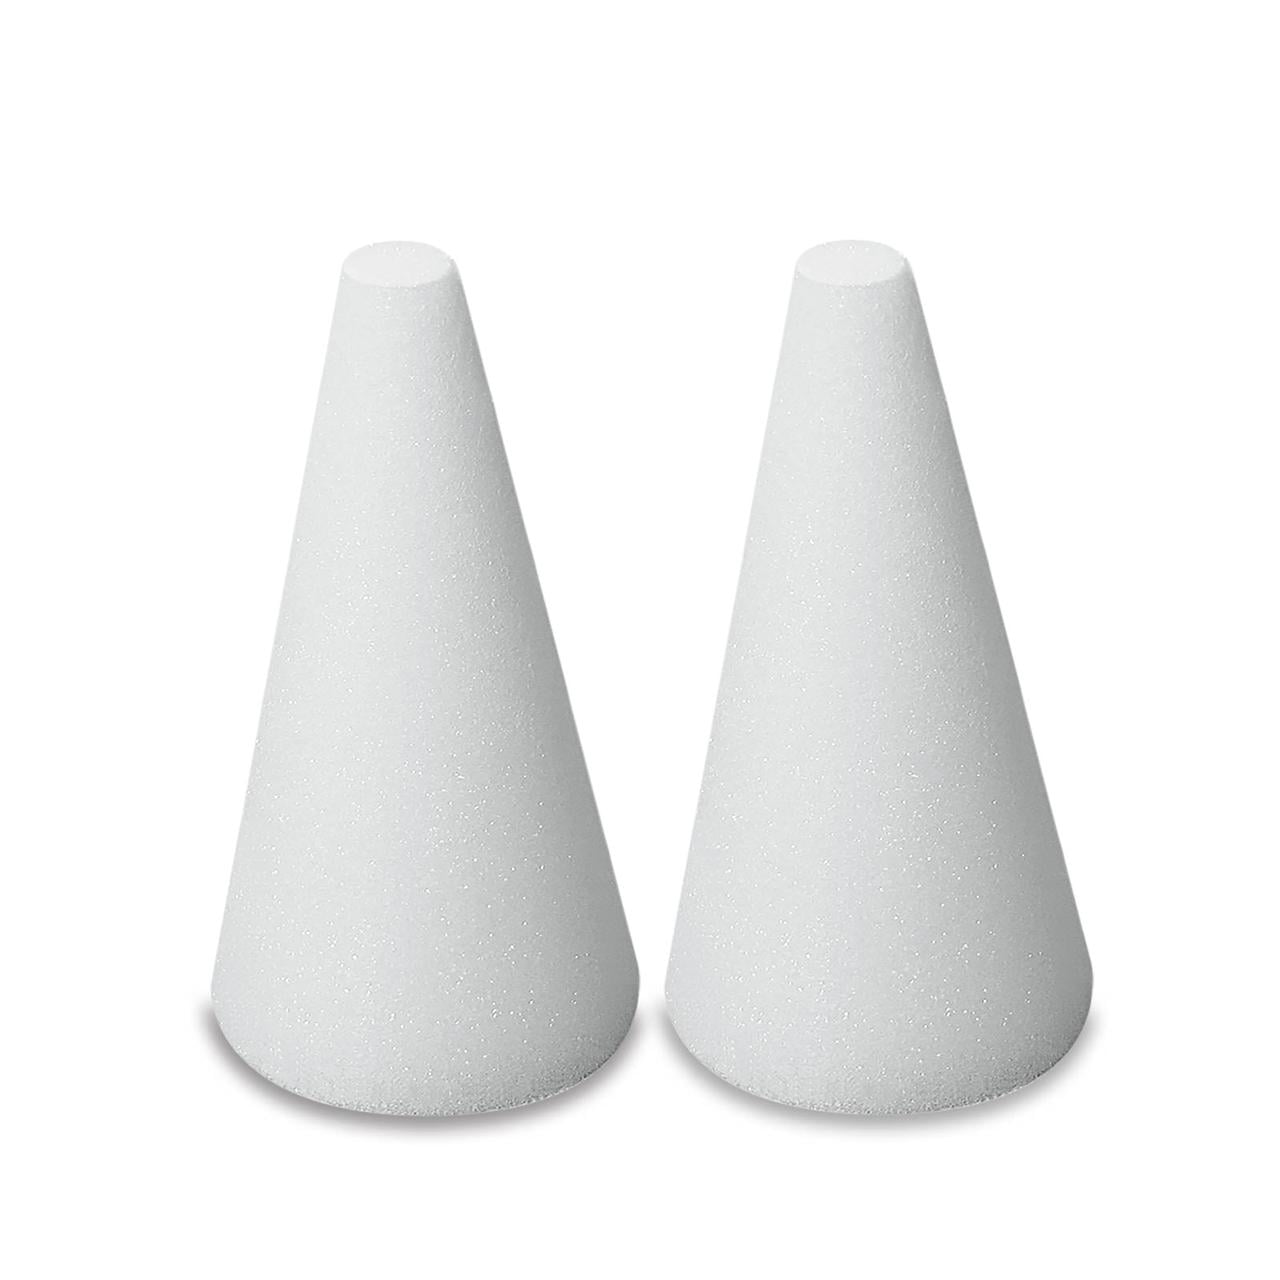 Large Foam Cones for Crafts - Set of 6-12 inches Tall  